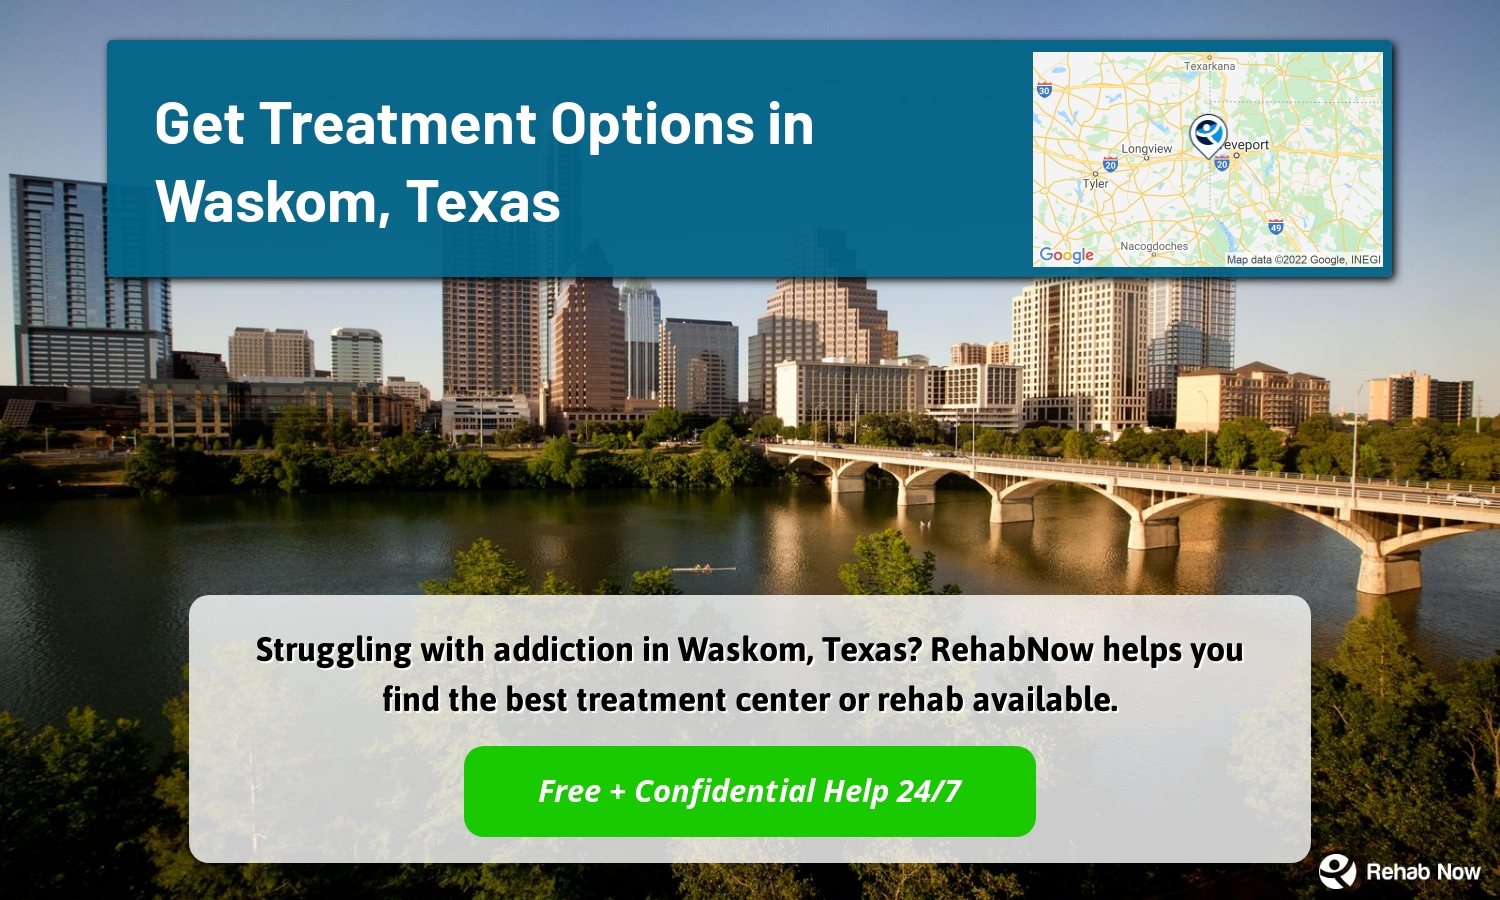 Struggling with addiction in Waskom, Texas? RehabNow helps you find the best treatment center or rehab available.